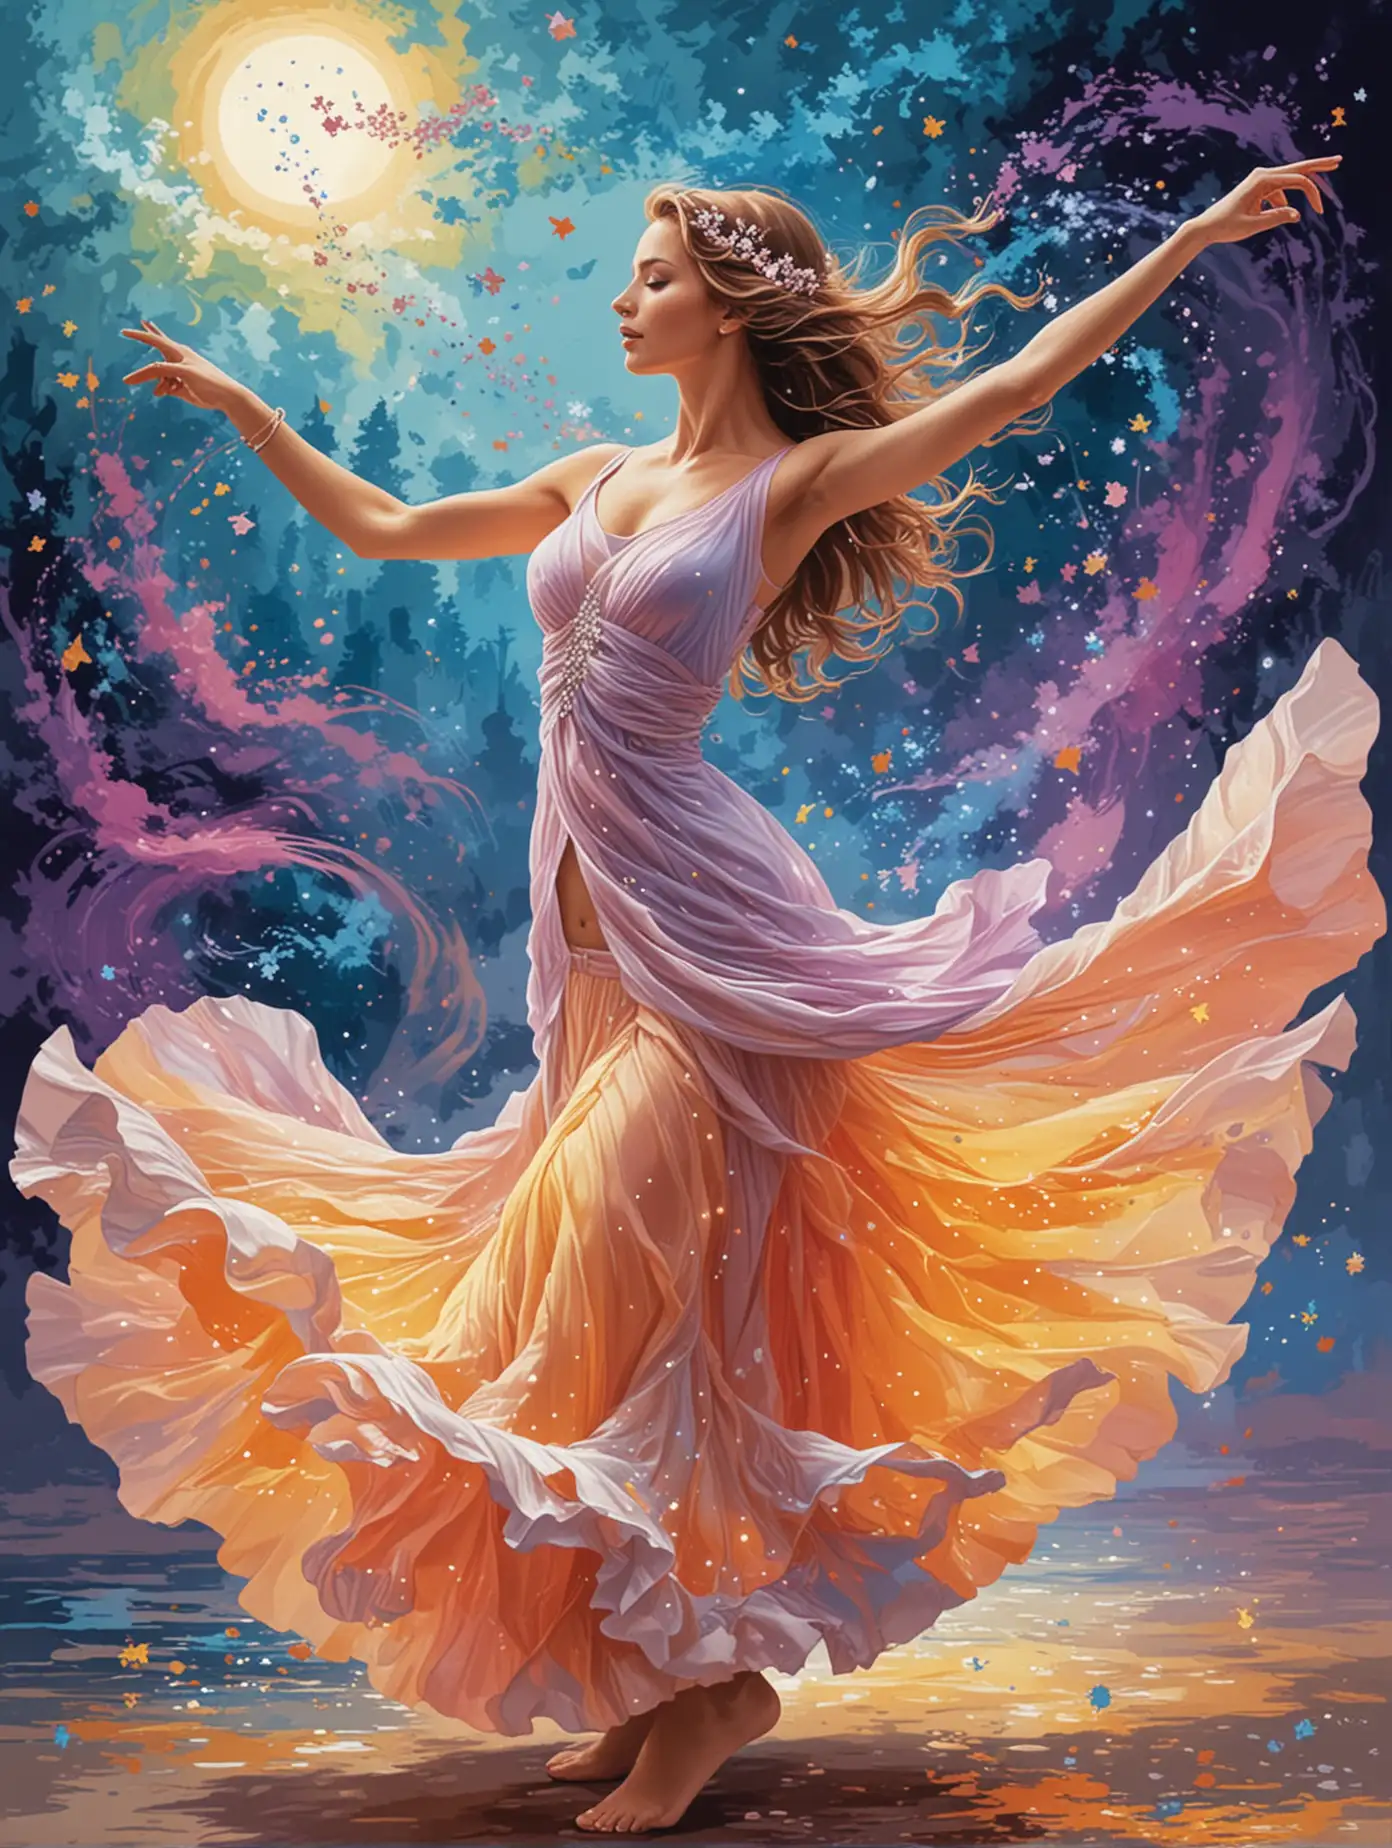 painting of Dream Dancing in 24 colors ready for painting by numbers kit